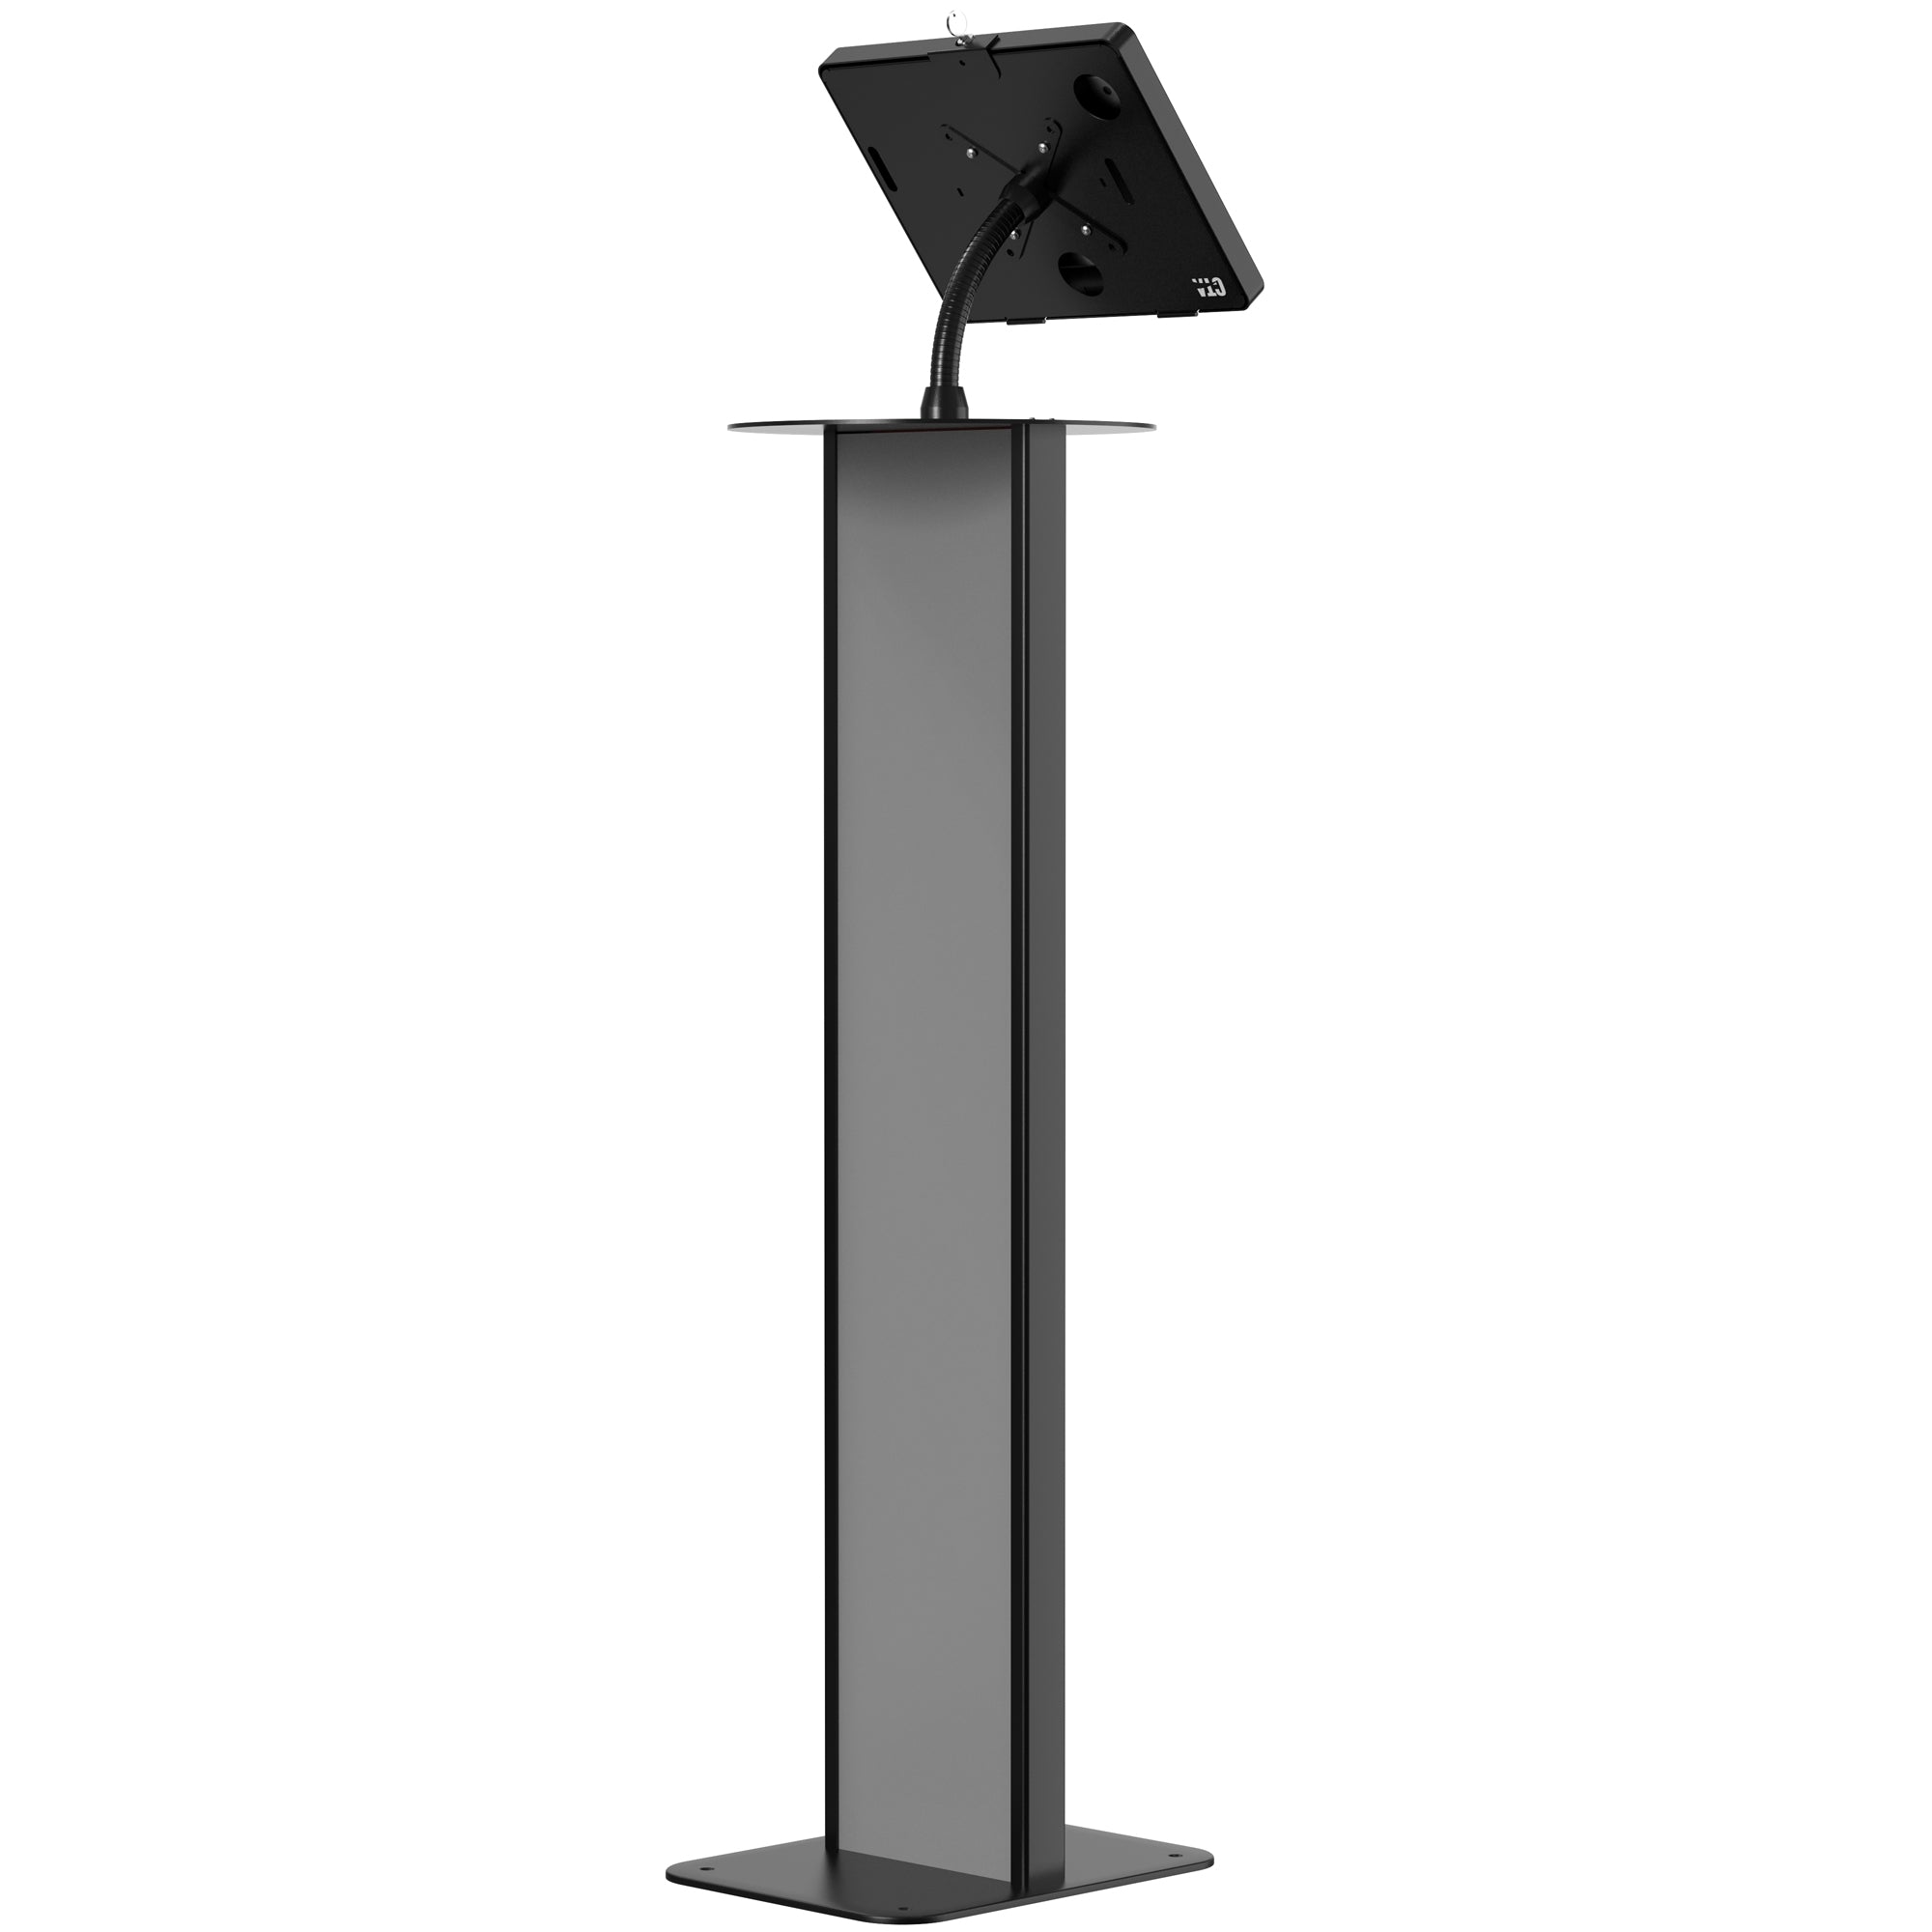 Premium Floor Stand Workstation with Universal Security Enclosure